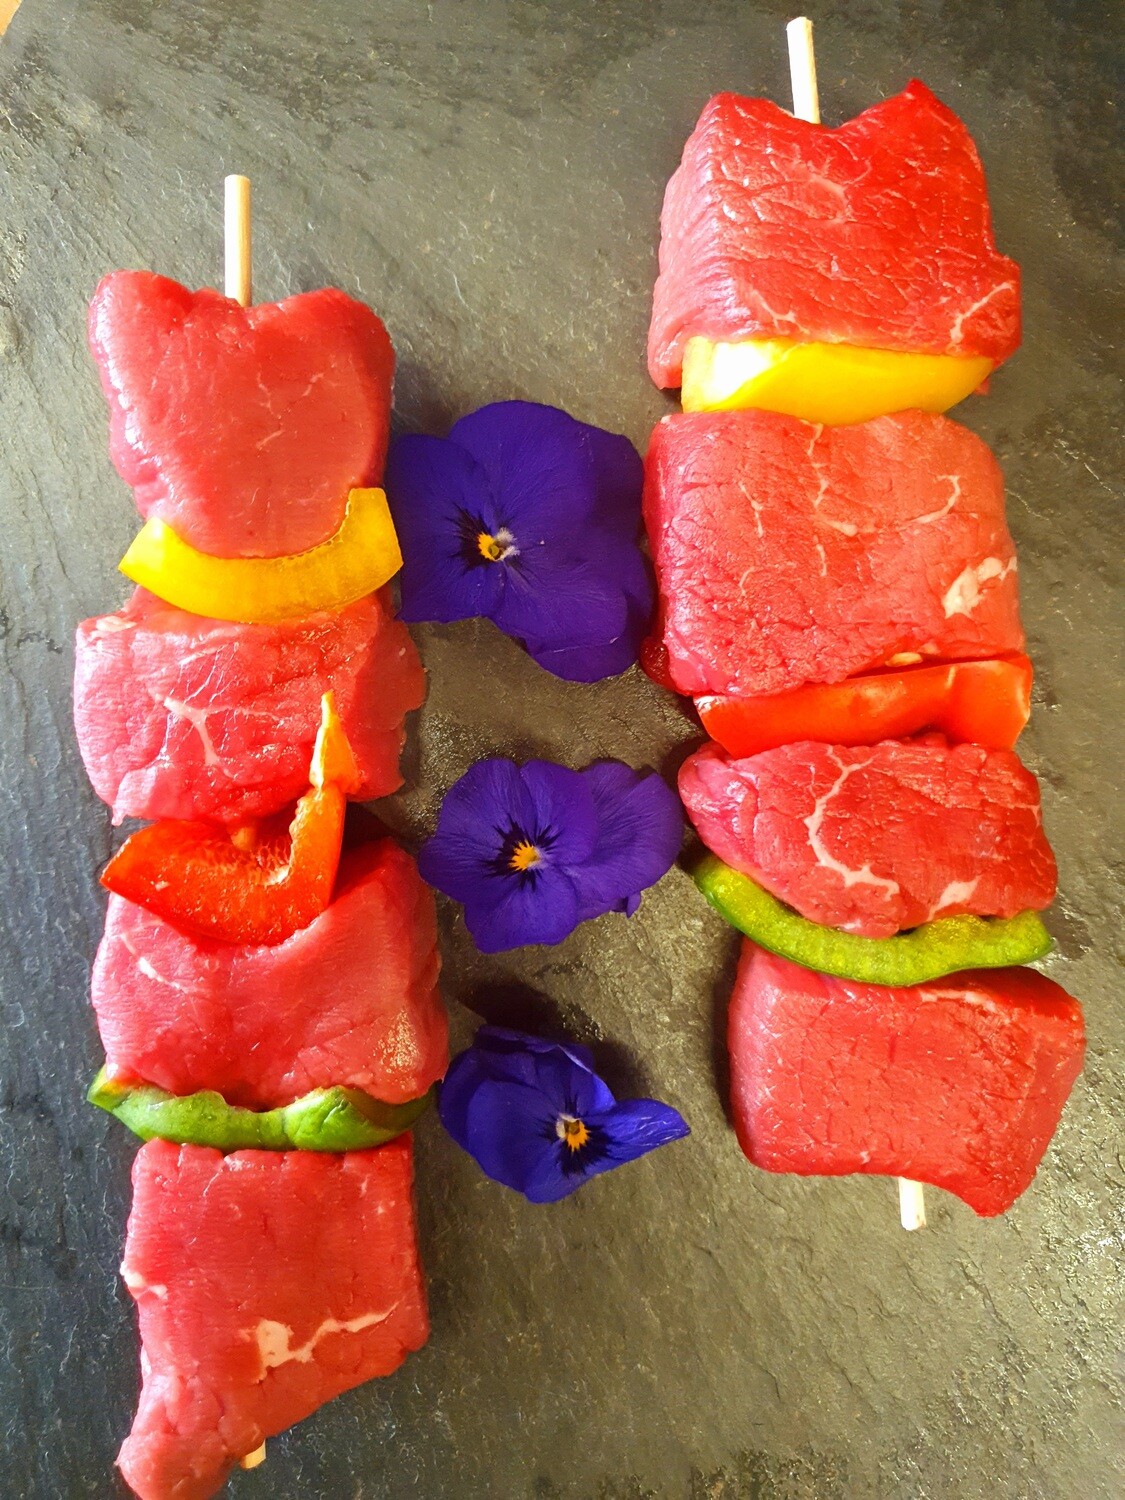 Beef and pepper skewer (about 180gr.) (Switzerland)